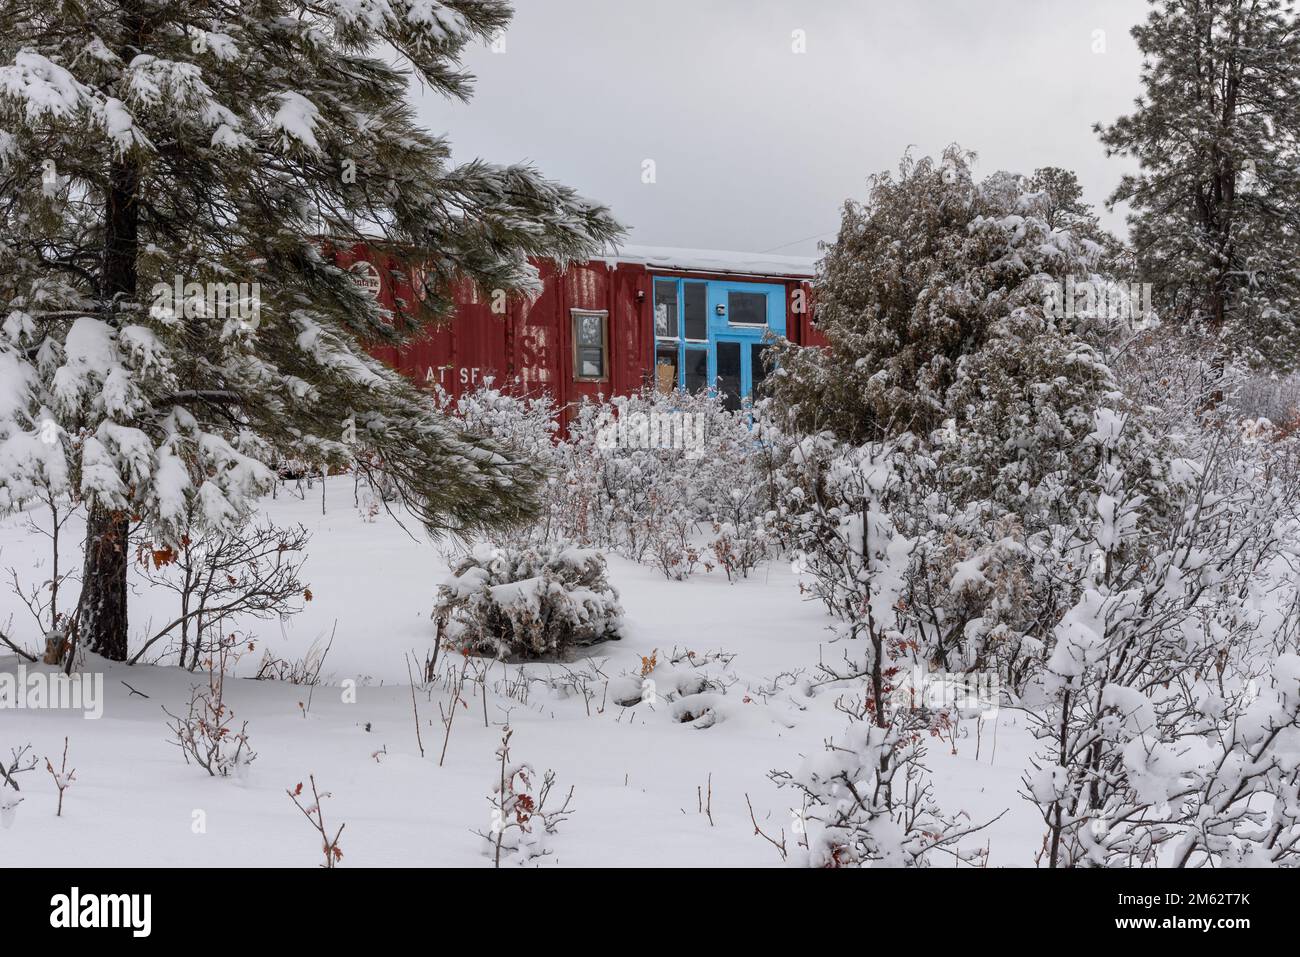 Bright dark red train boxcar converted into living space with large windows and doors framed in turquoise in a snowy, wooded area in New Mexico, USA. Stock Photo